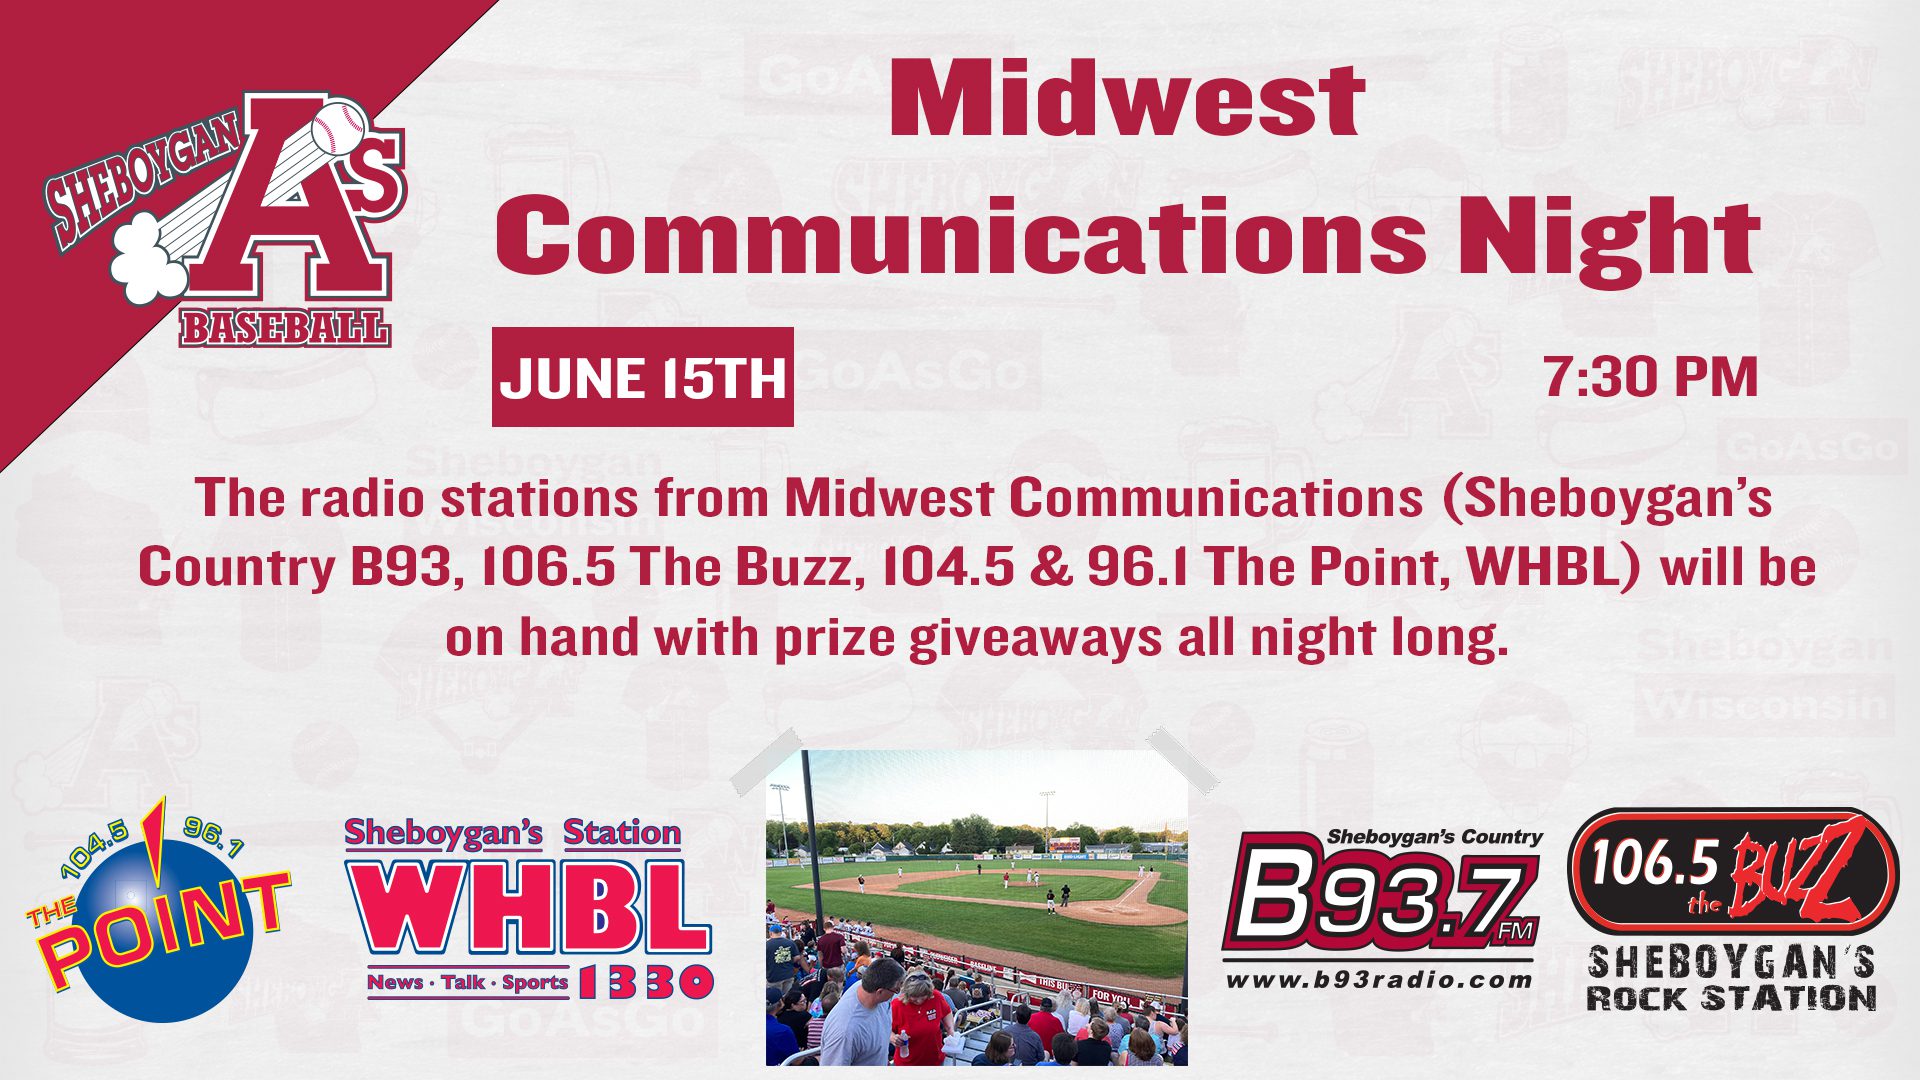 Midwest Communications Night